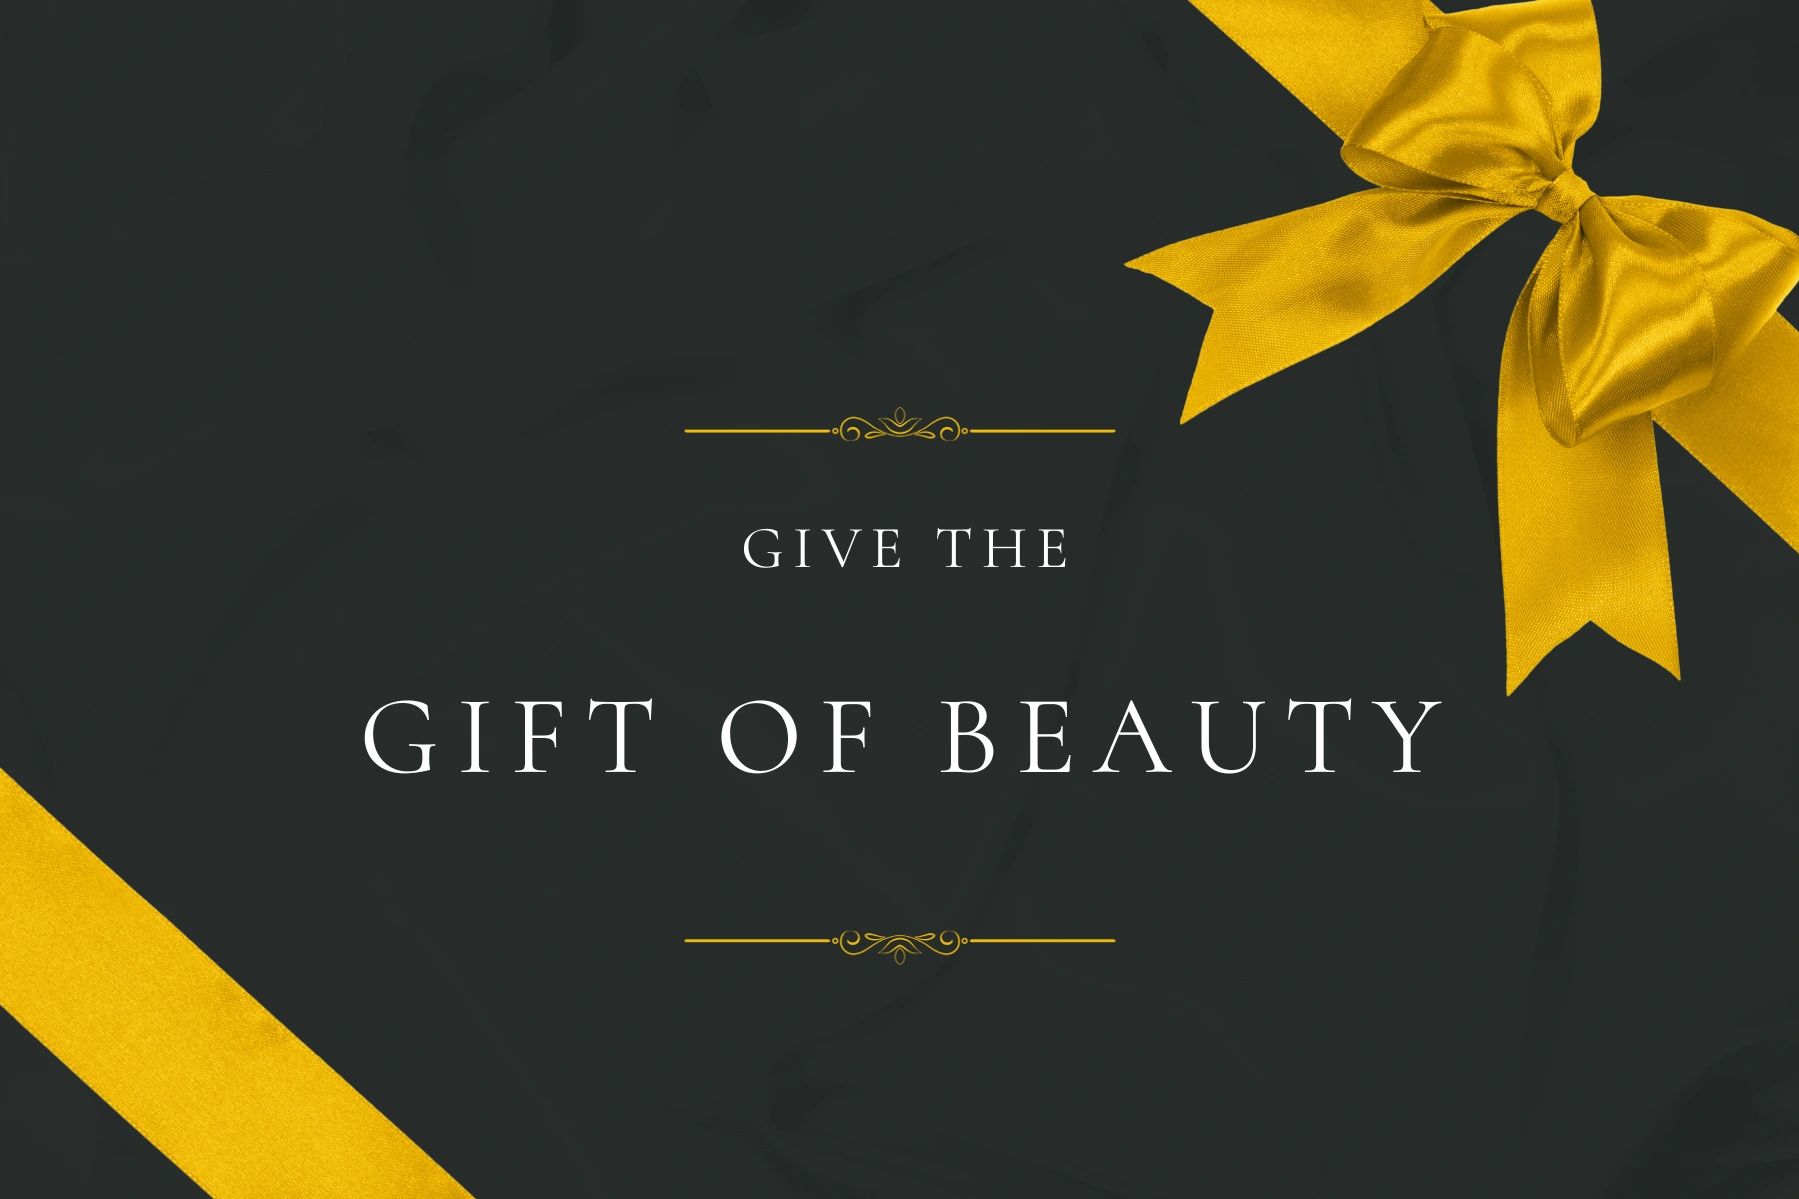 Buy a gift card from Visual Beautè Studio and treat yoourself or a loved one to the gift of beauty!